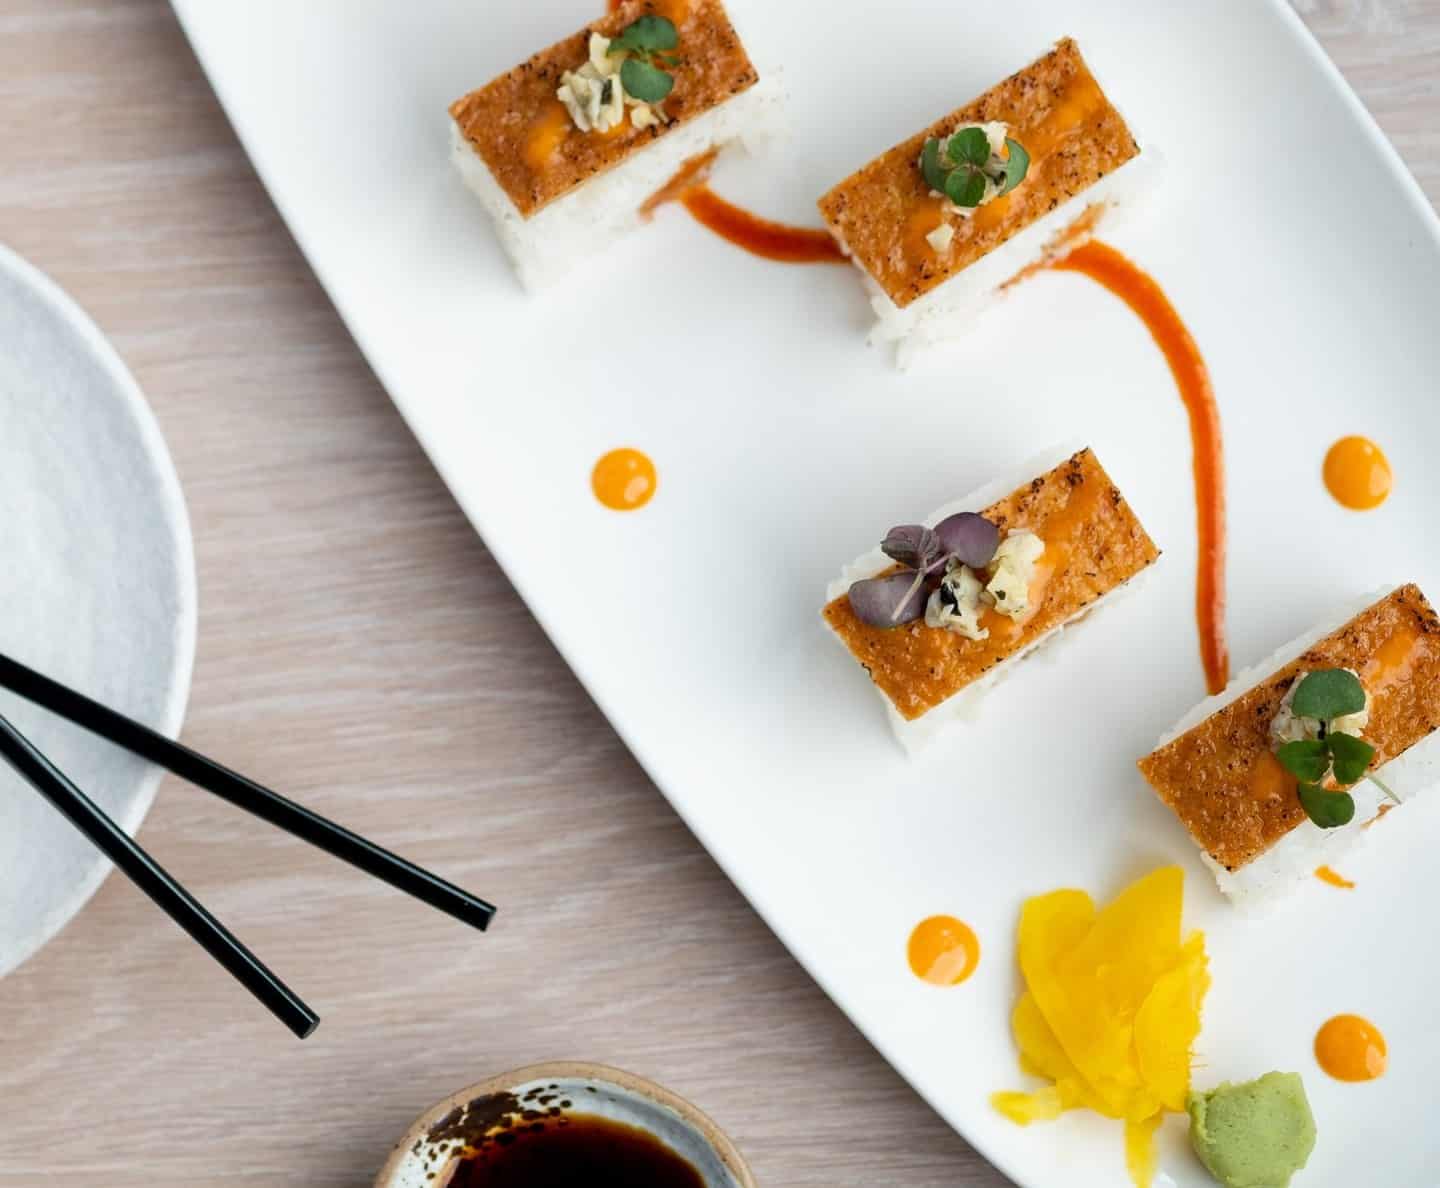 Seeking Satisfaction with Plant-based Sushi? We Have a List for You!